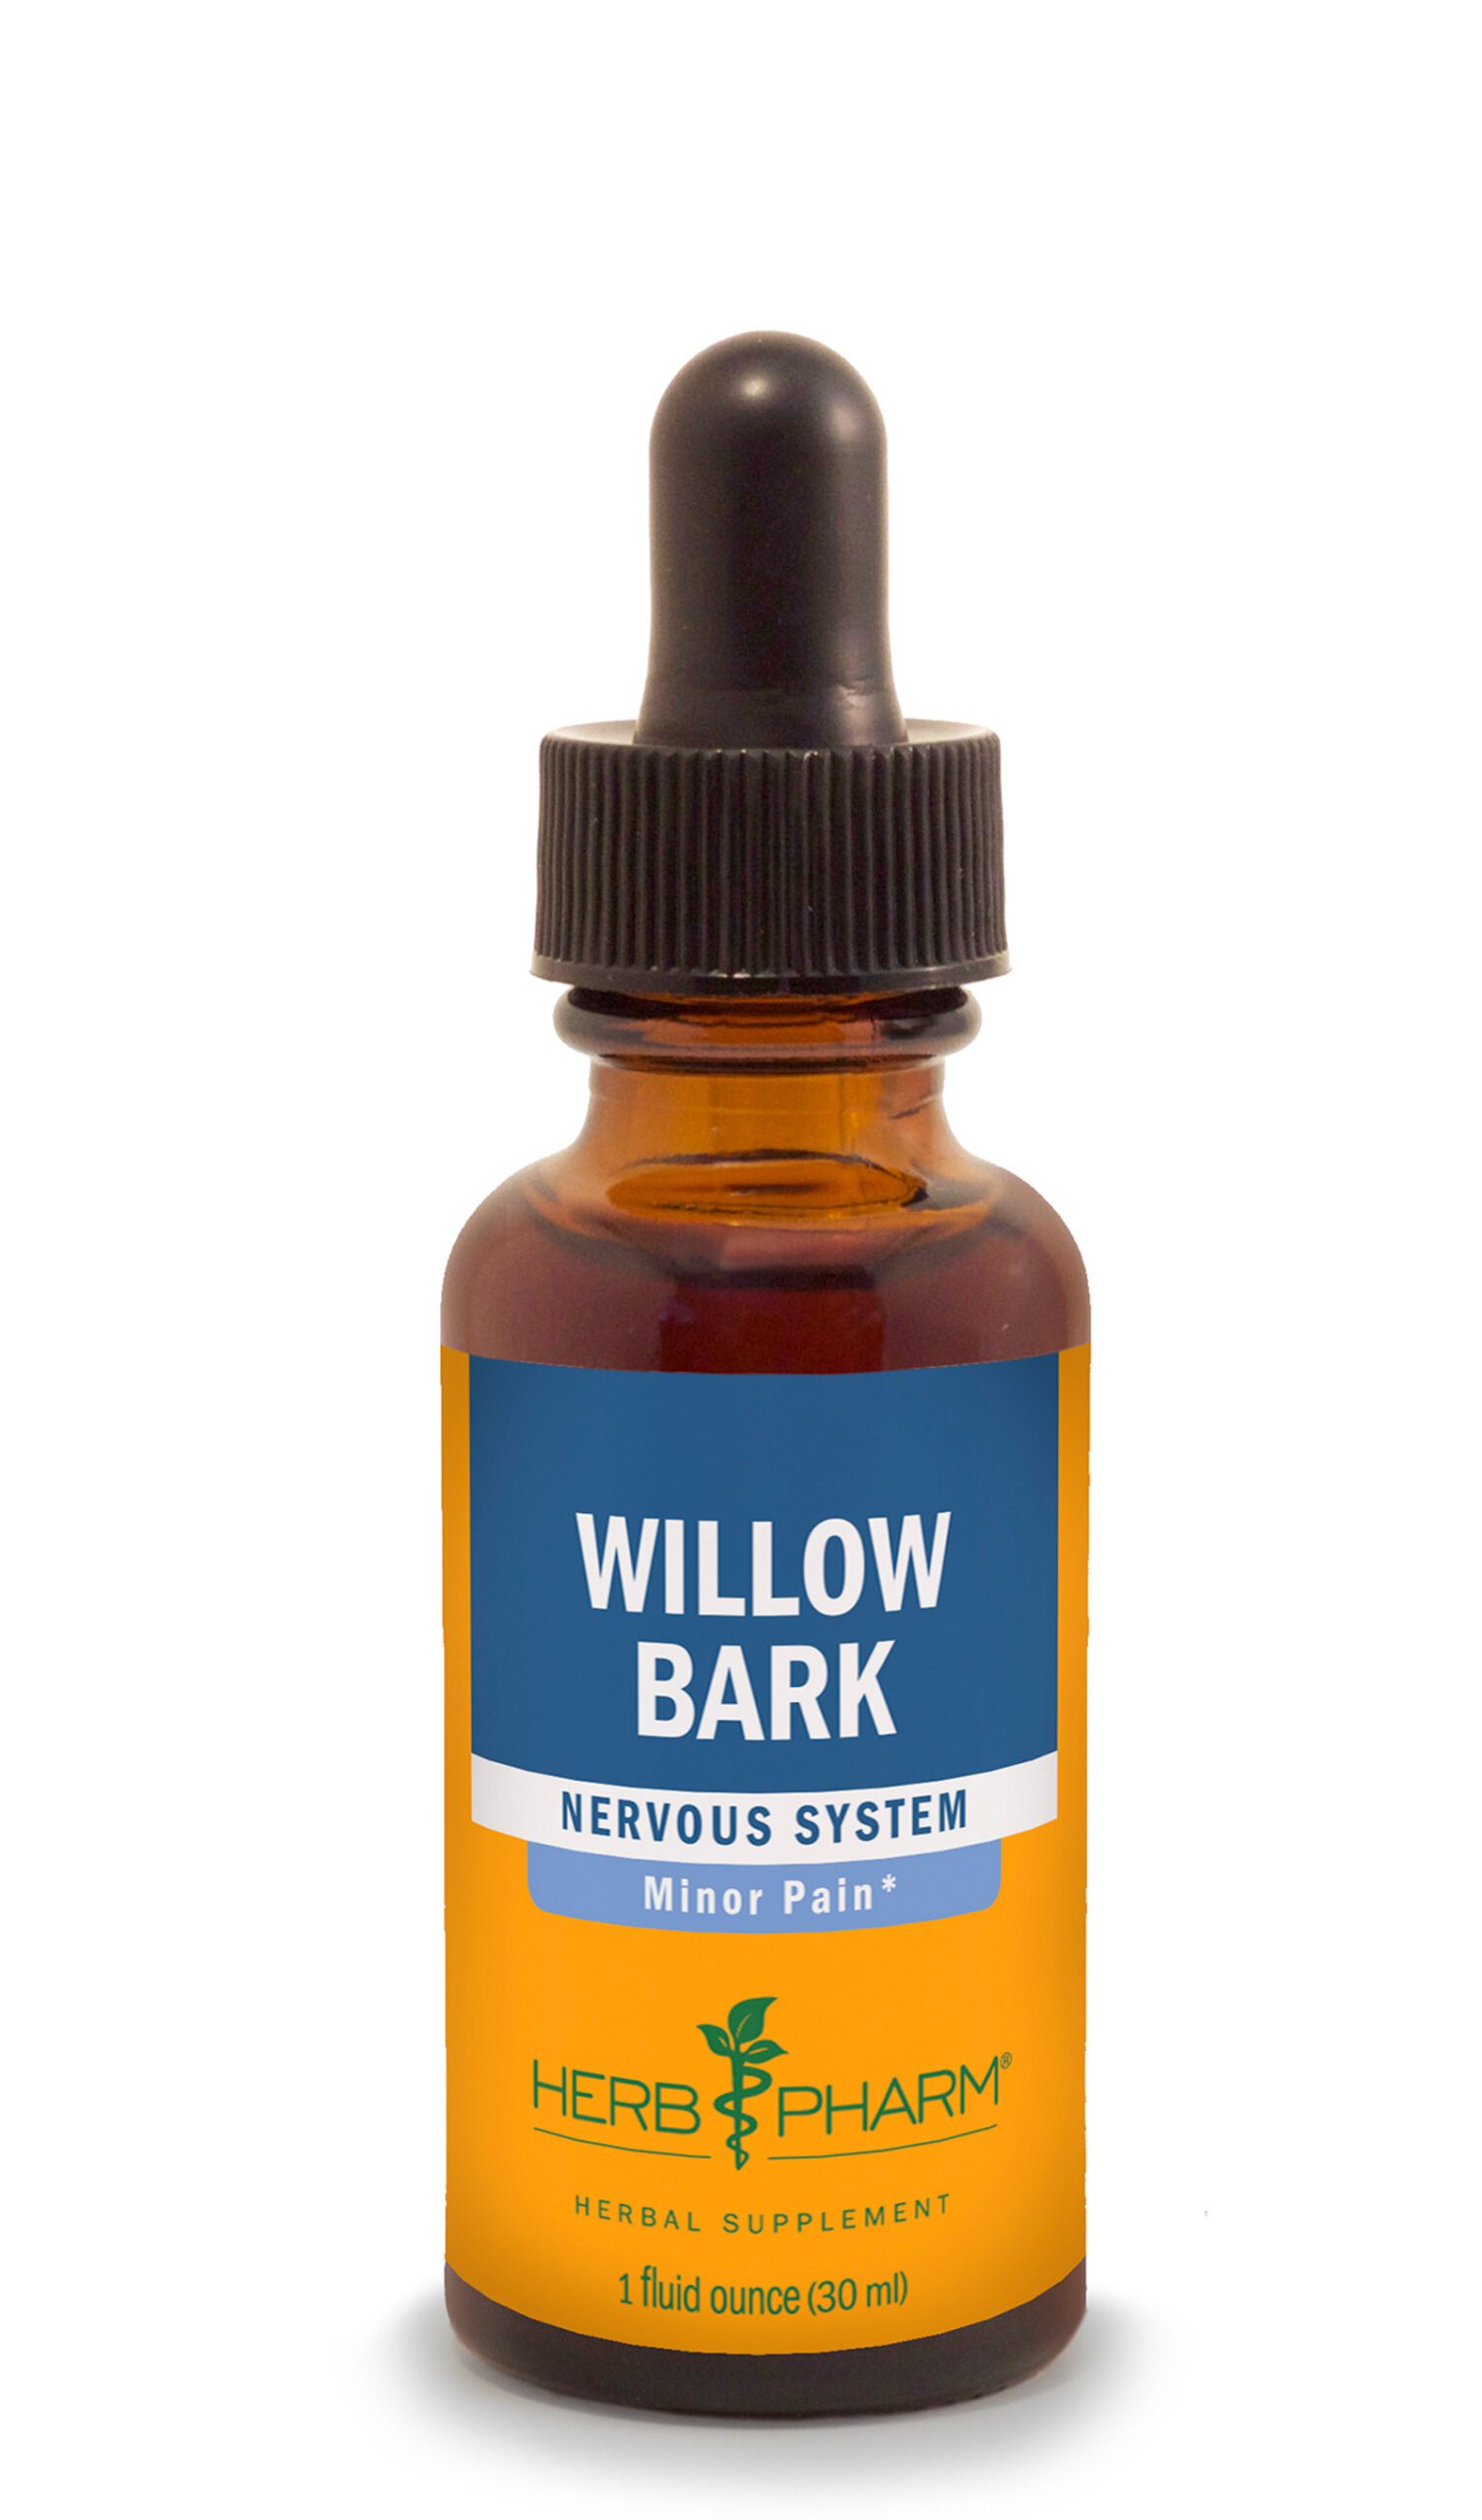 Product Listing Image for Herb Pharm Willow Bark Tincture 1oz